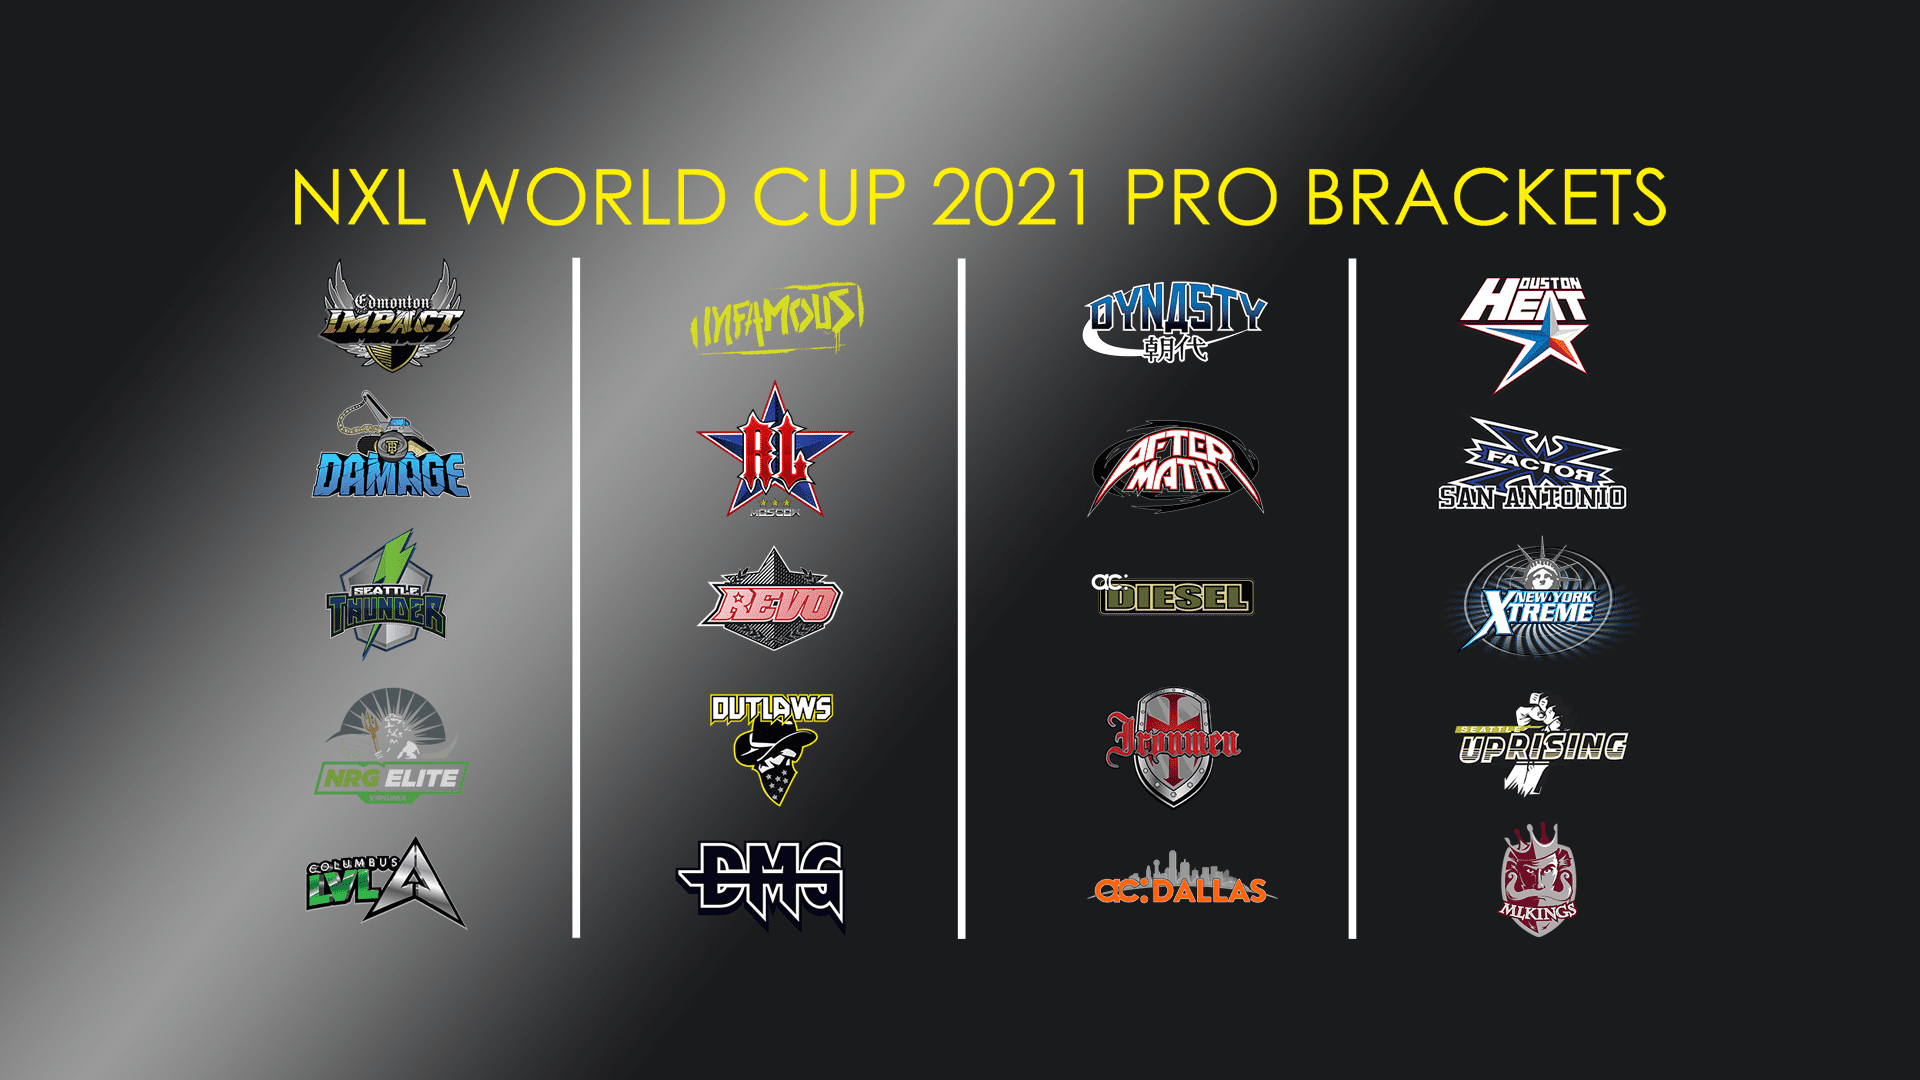 NXL World Cup Pro Brackets are set!